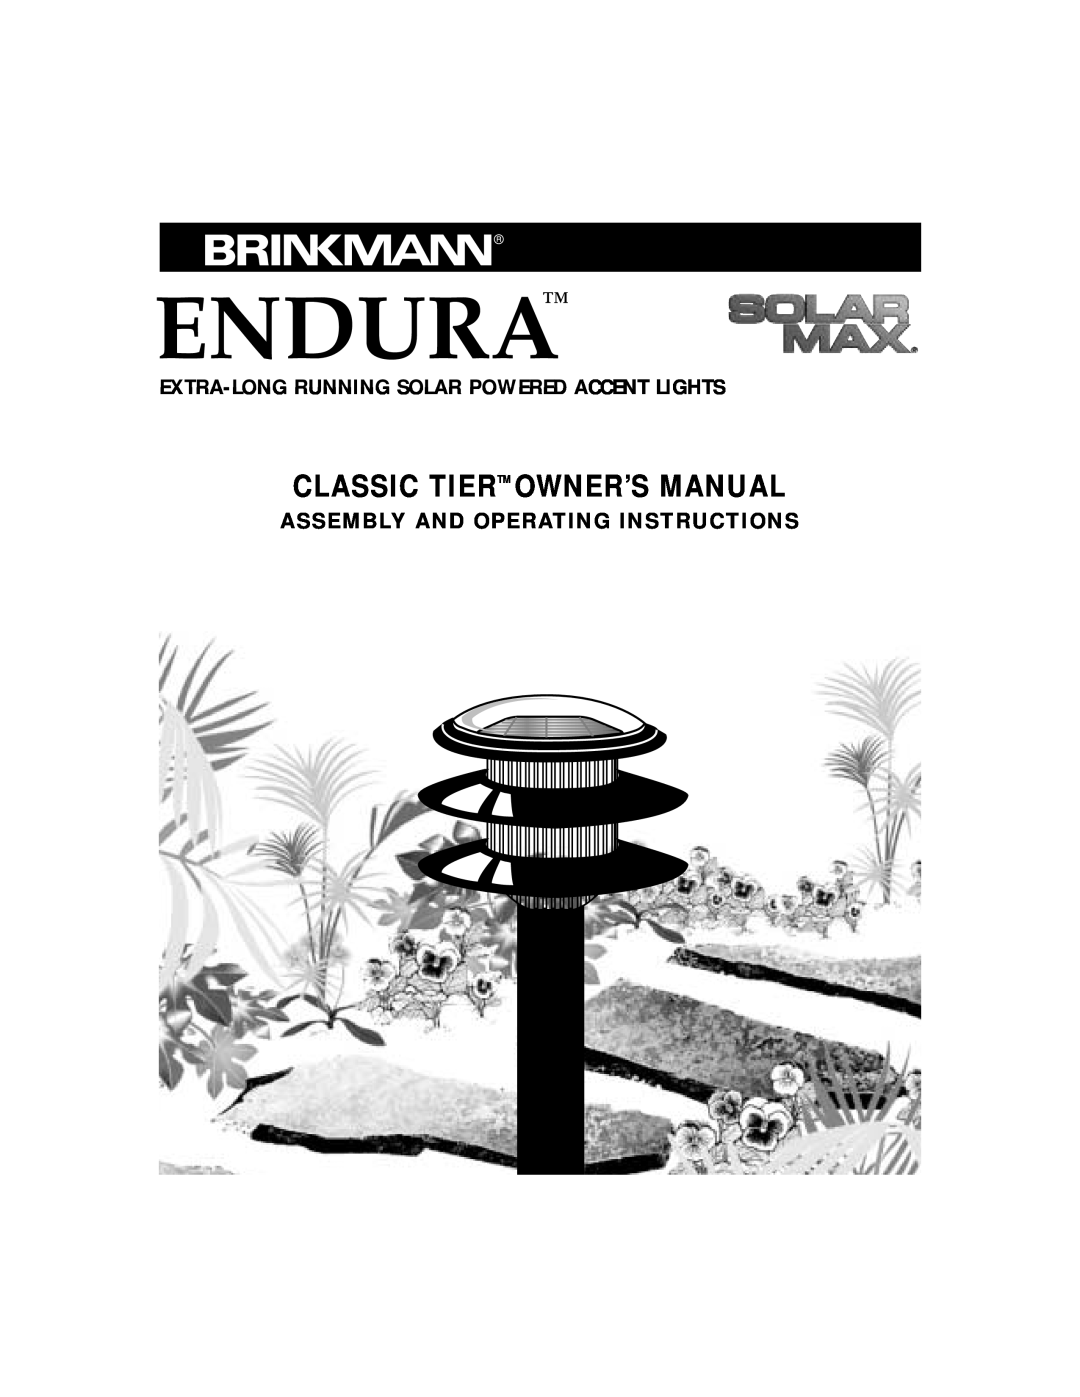 Brinkmann 822-0408-4, 822-0408-0 owner manual Classic Tiertm Owner’S Manual, Assembly And Operating Instructions, Endura 